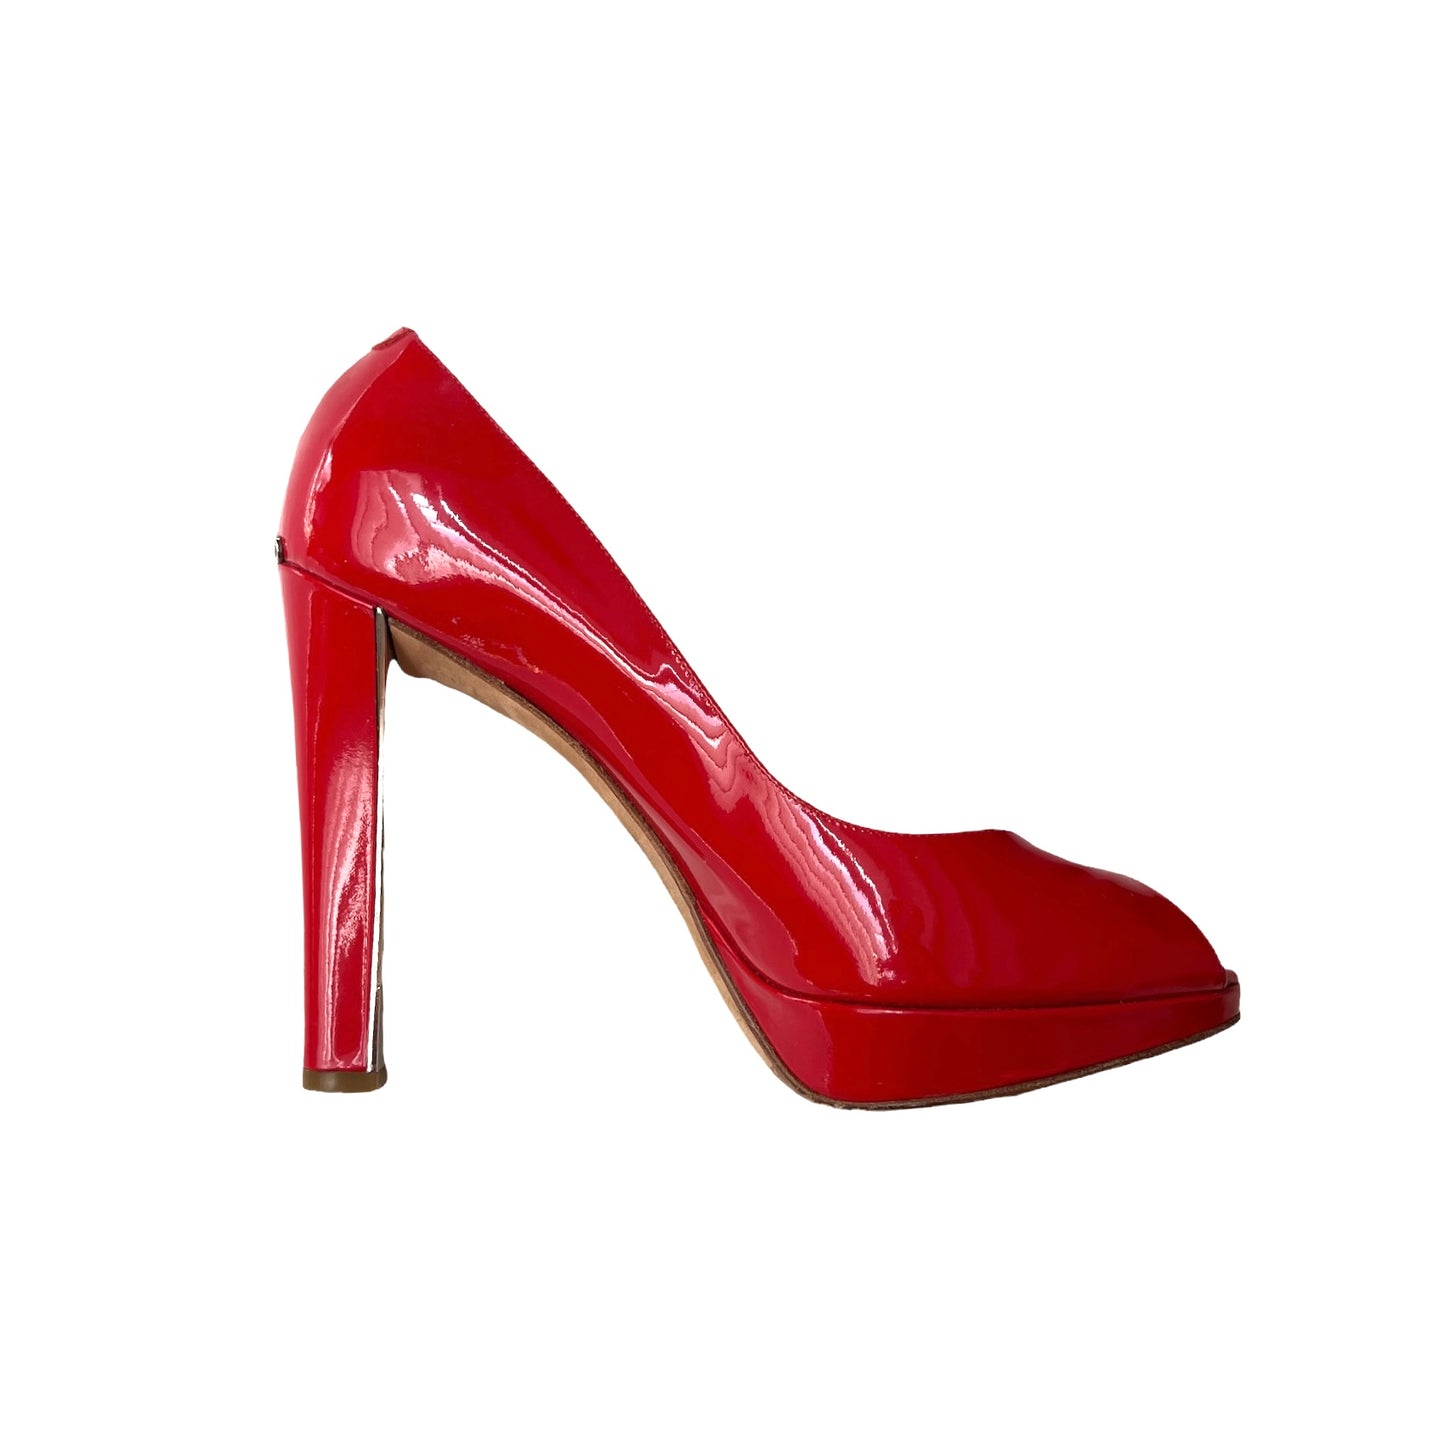 Red Patent Leather Heels - 7.5